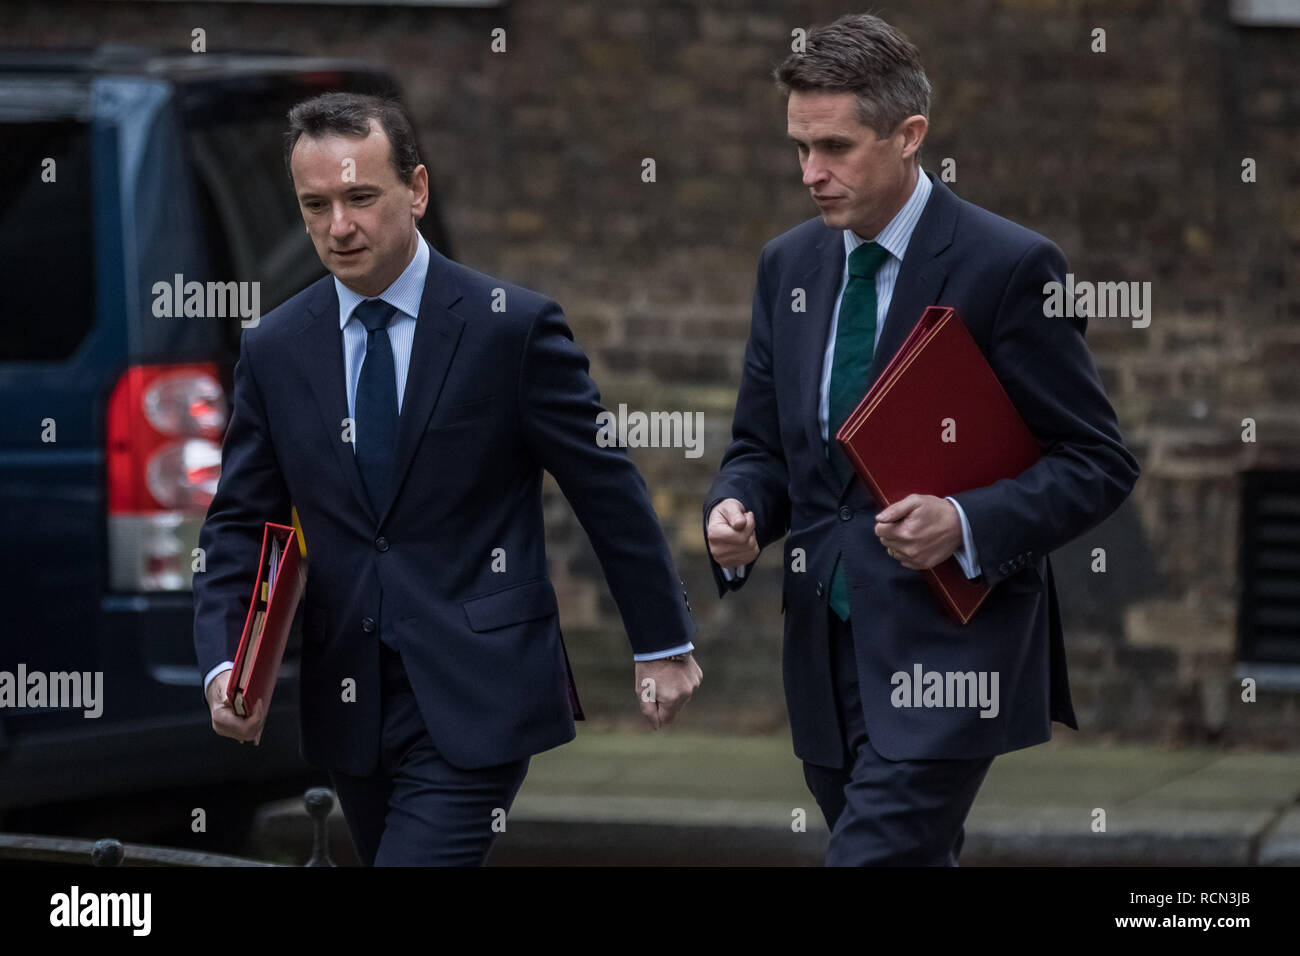 London, UK. 15th January, 2019. Ministers arrive for the weekly cabinet meeting at 10 Downing Street on the day of the ‘meaningful vote’ on Prime Minister’s Theresa May’s Brexit withdrawal deal. Credit: Guy Corbishley/Alamy Live News Stock Photo